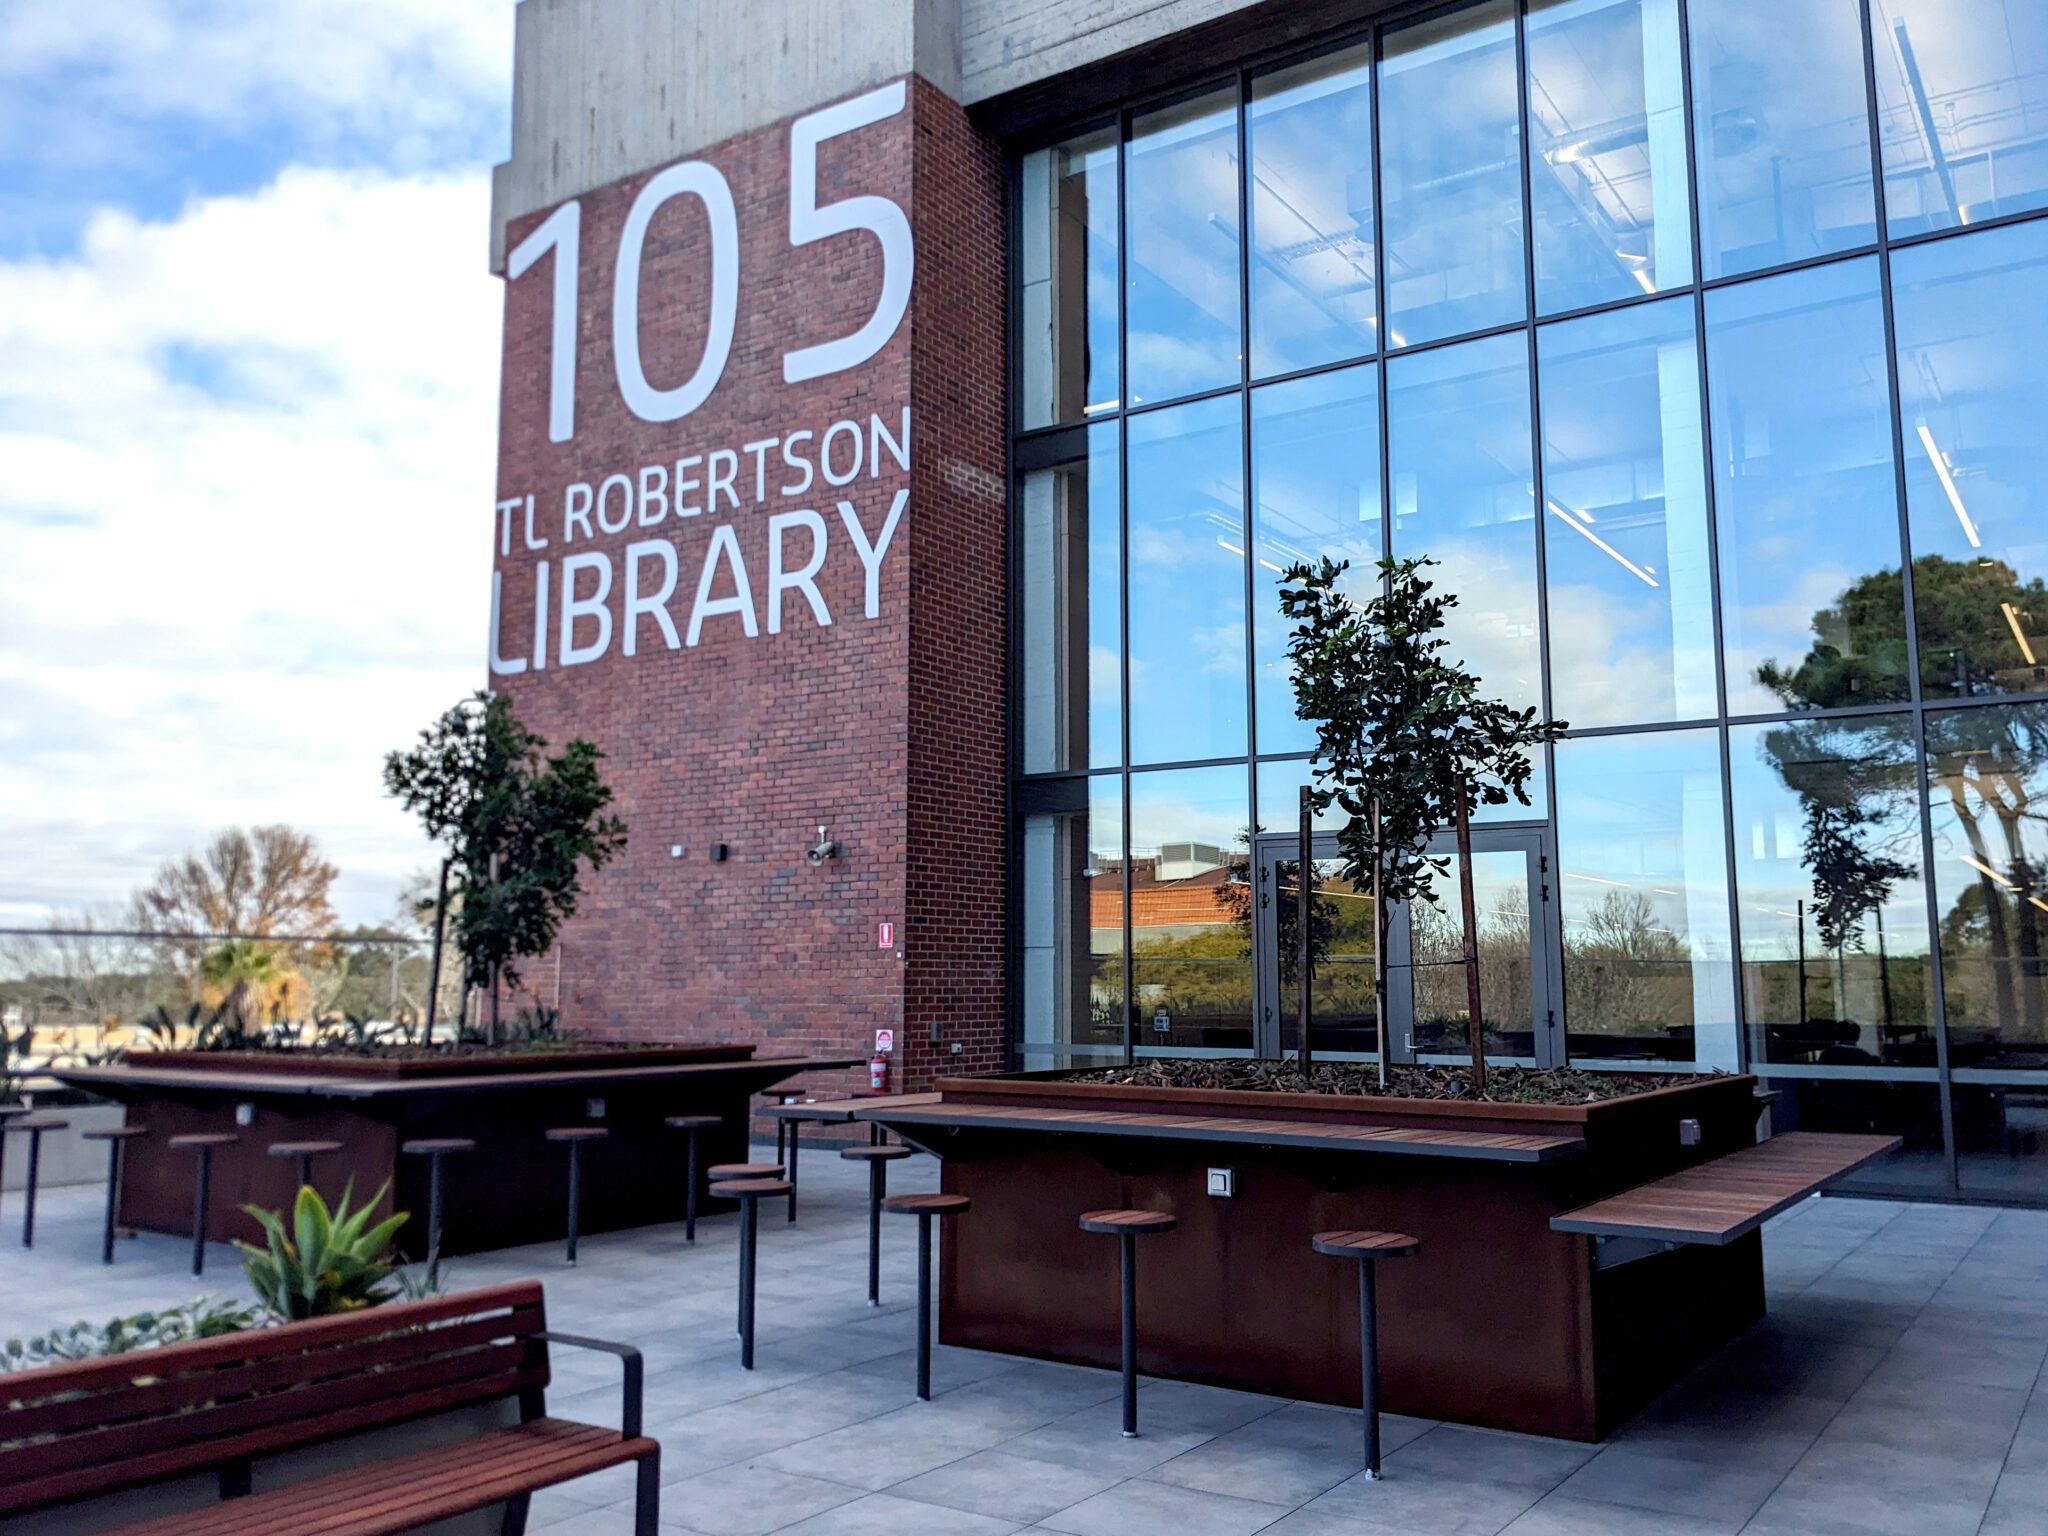 Level 4 outdoor terrace. Wooden benches, some trees and the TL Robertson Library sign is visible on the side of the building.